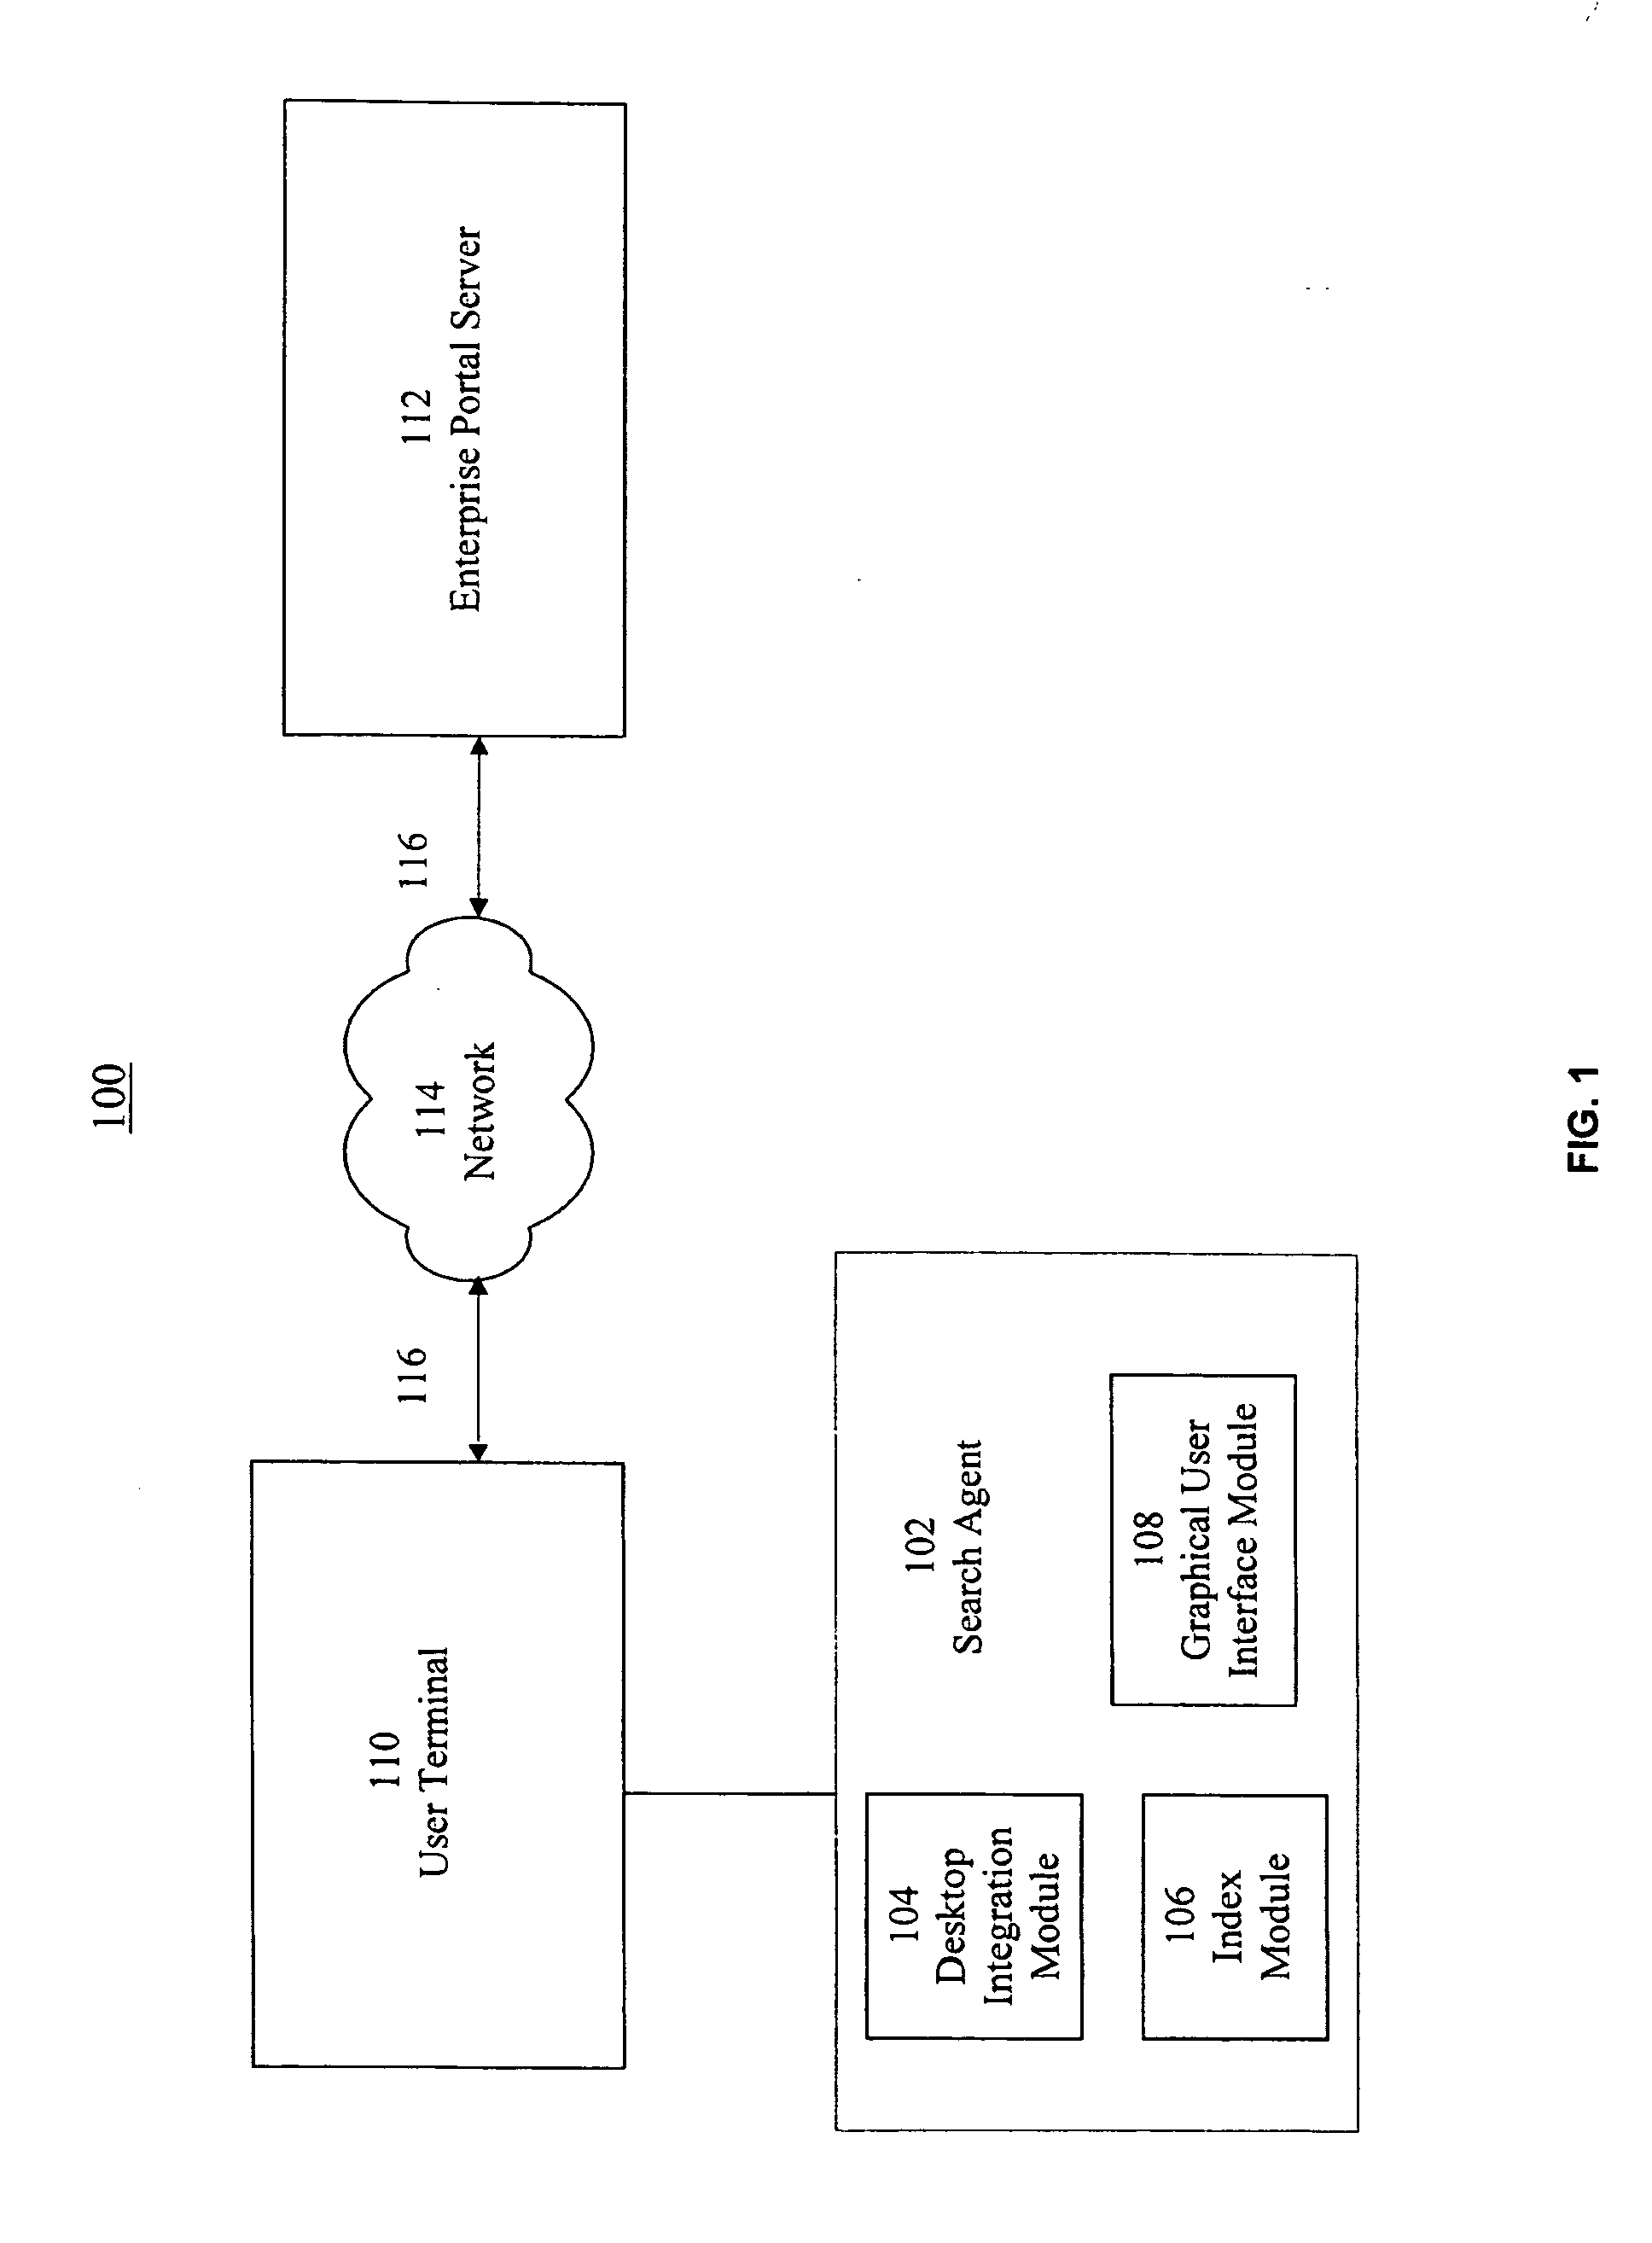 System and method for providing multi-variable dynamic search results visualizations